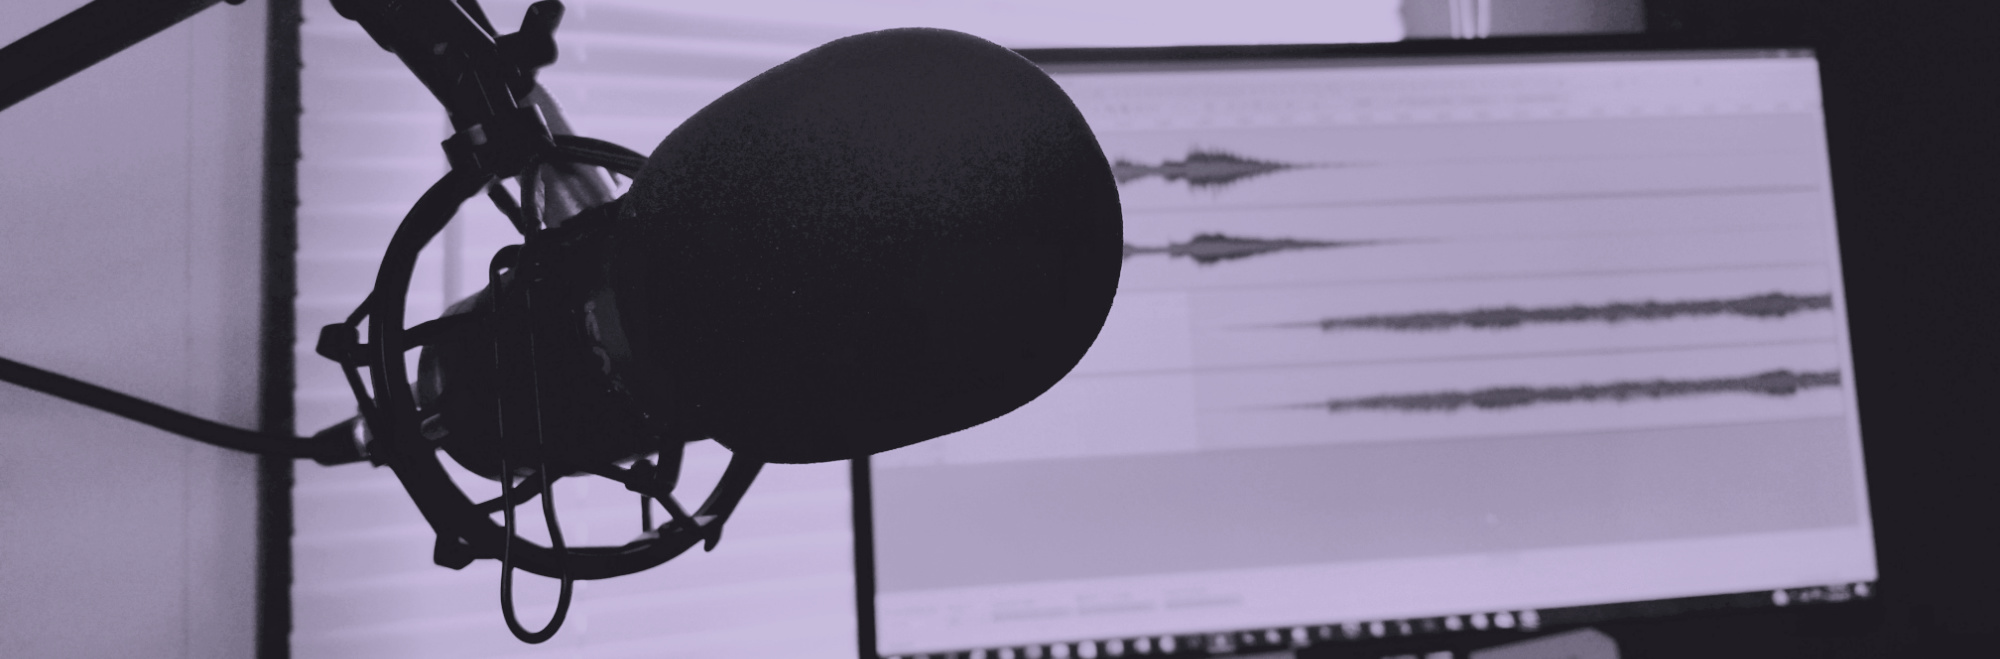 Choosing a Microphone for Podcasting